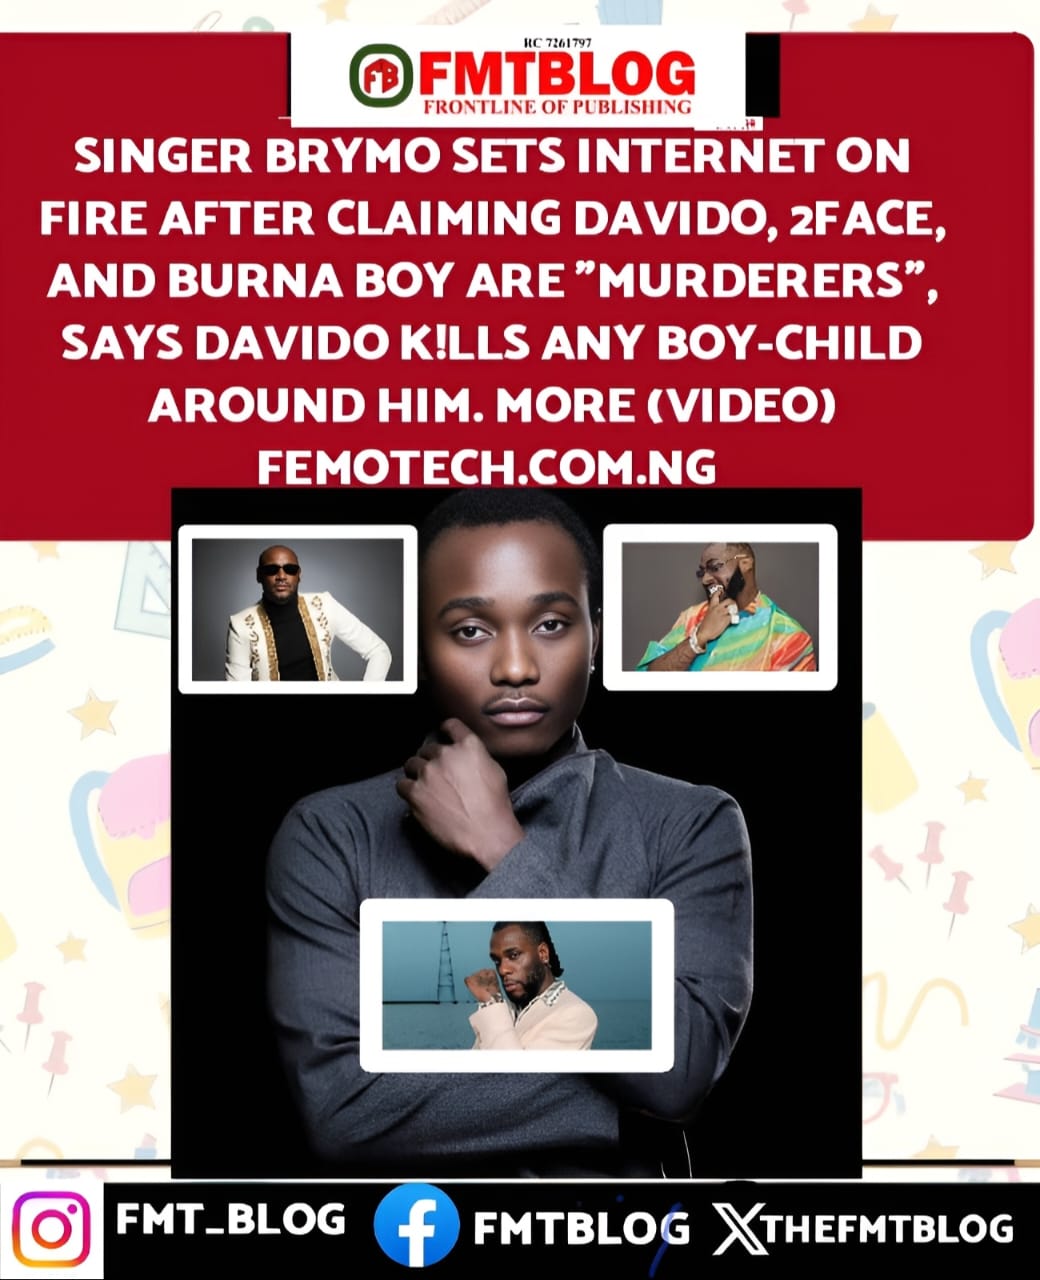 Singer Brymo Sets Internet On Fire After Claiming Davido, 2face, And Burna Boy Are ”Murderers”, Says Davido K!lls Any Boy-Child Around Him, More (VIDEO)